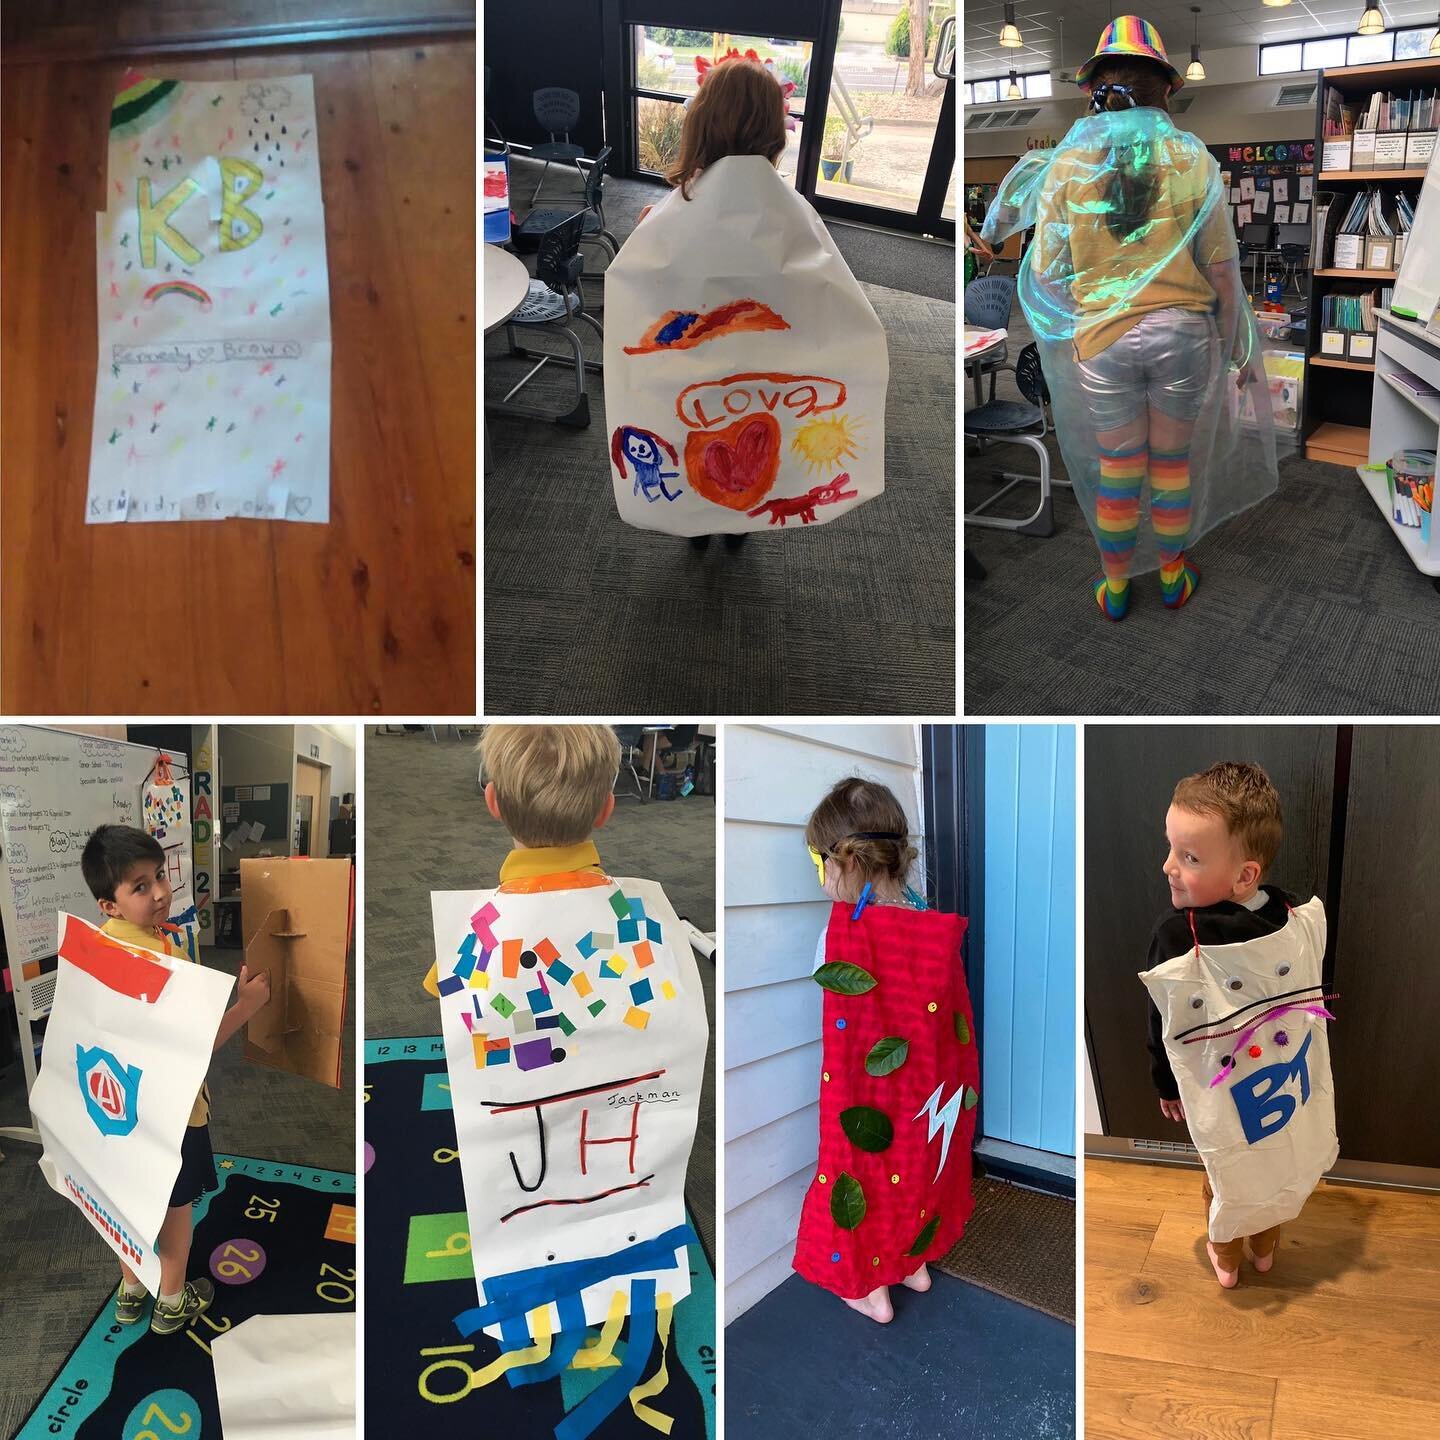 It&rsquo;s been 2 WEEKS of FUN with my kids activity- MY CAPE. I&rsquo;ve seen some really COOL CAPES made and the FEATURES on them have been AMAZING. Harry even went the extra yard and made a SHIELD! Most IMPORTANTLY all the KIDS had a BLAST!

Here&